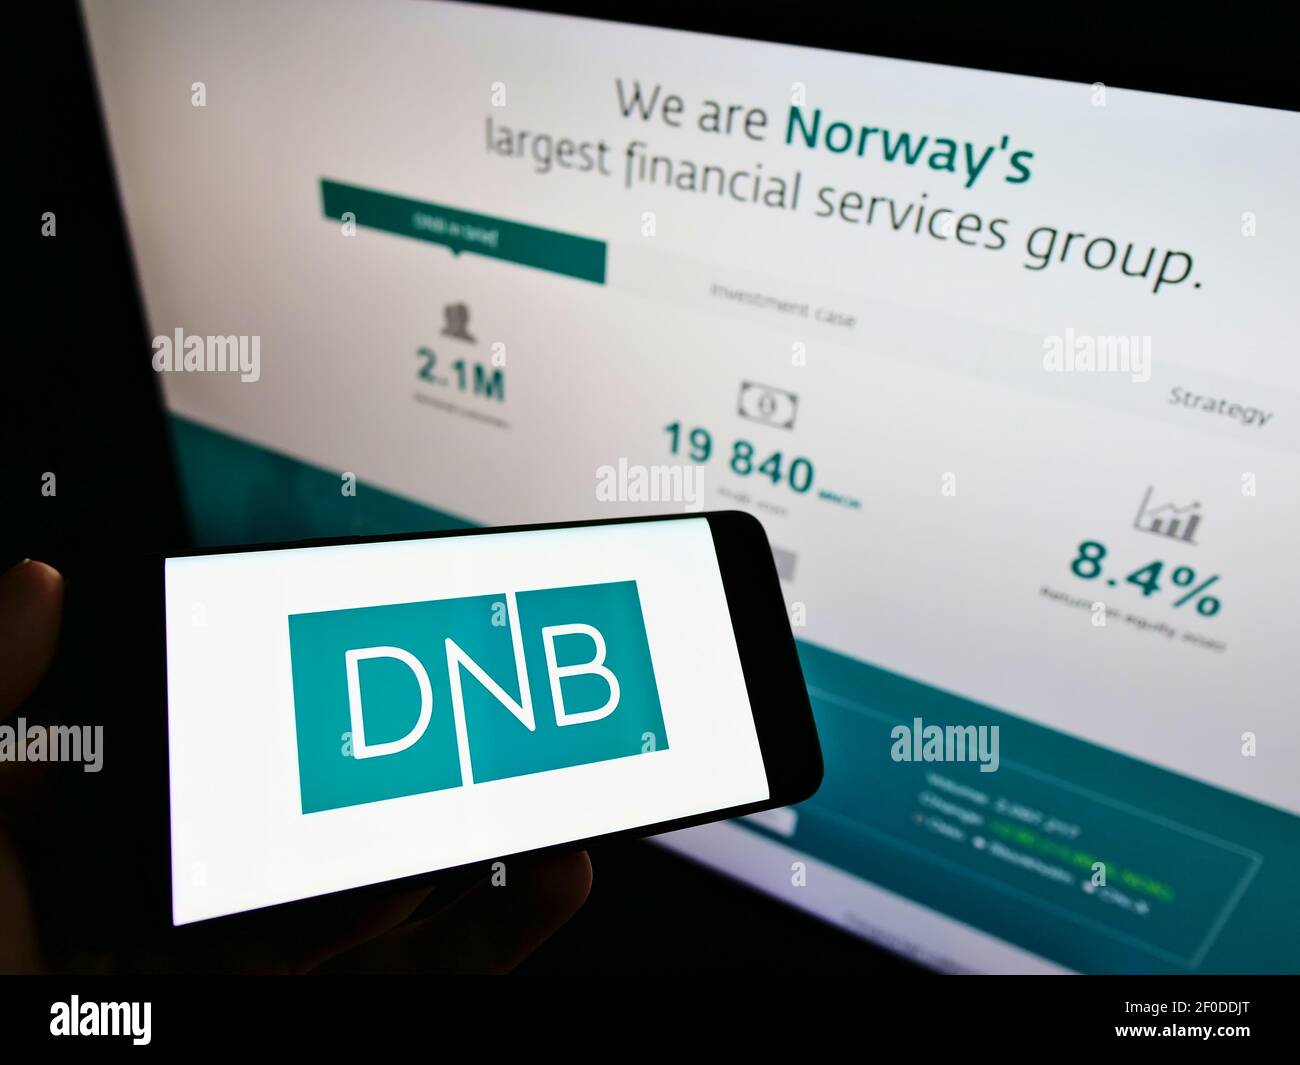 Person holding cellphone with business logo of Norwegian financial services company DNB ASA on screen in front of web page. Focus on phone display. Stock Photo